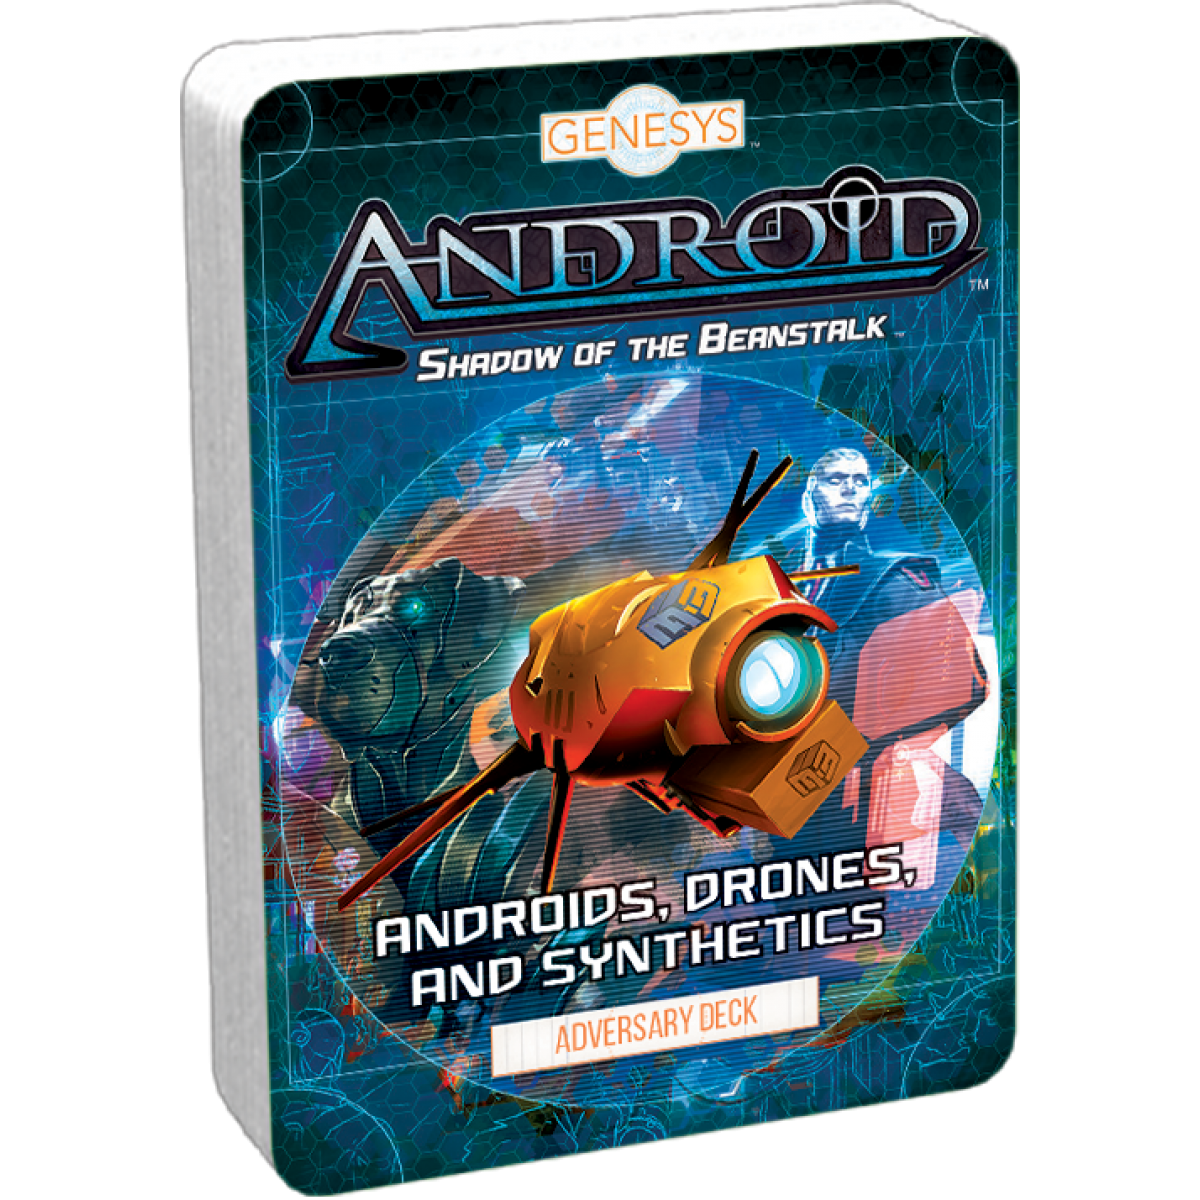 Genesys Androids Drones and Synthetics Adversary Deck